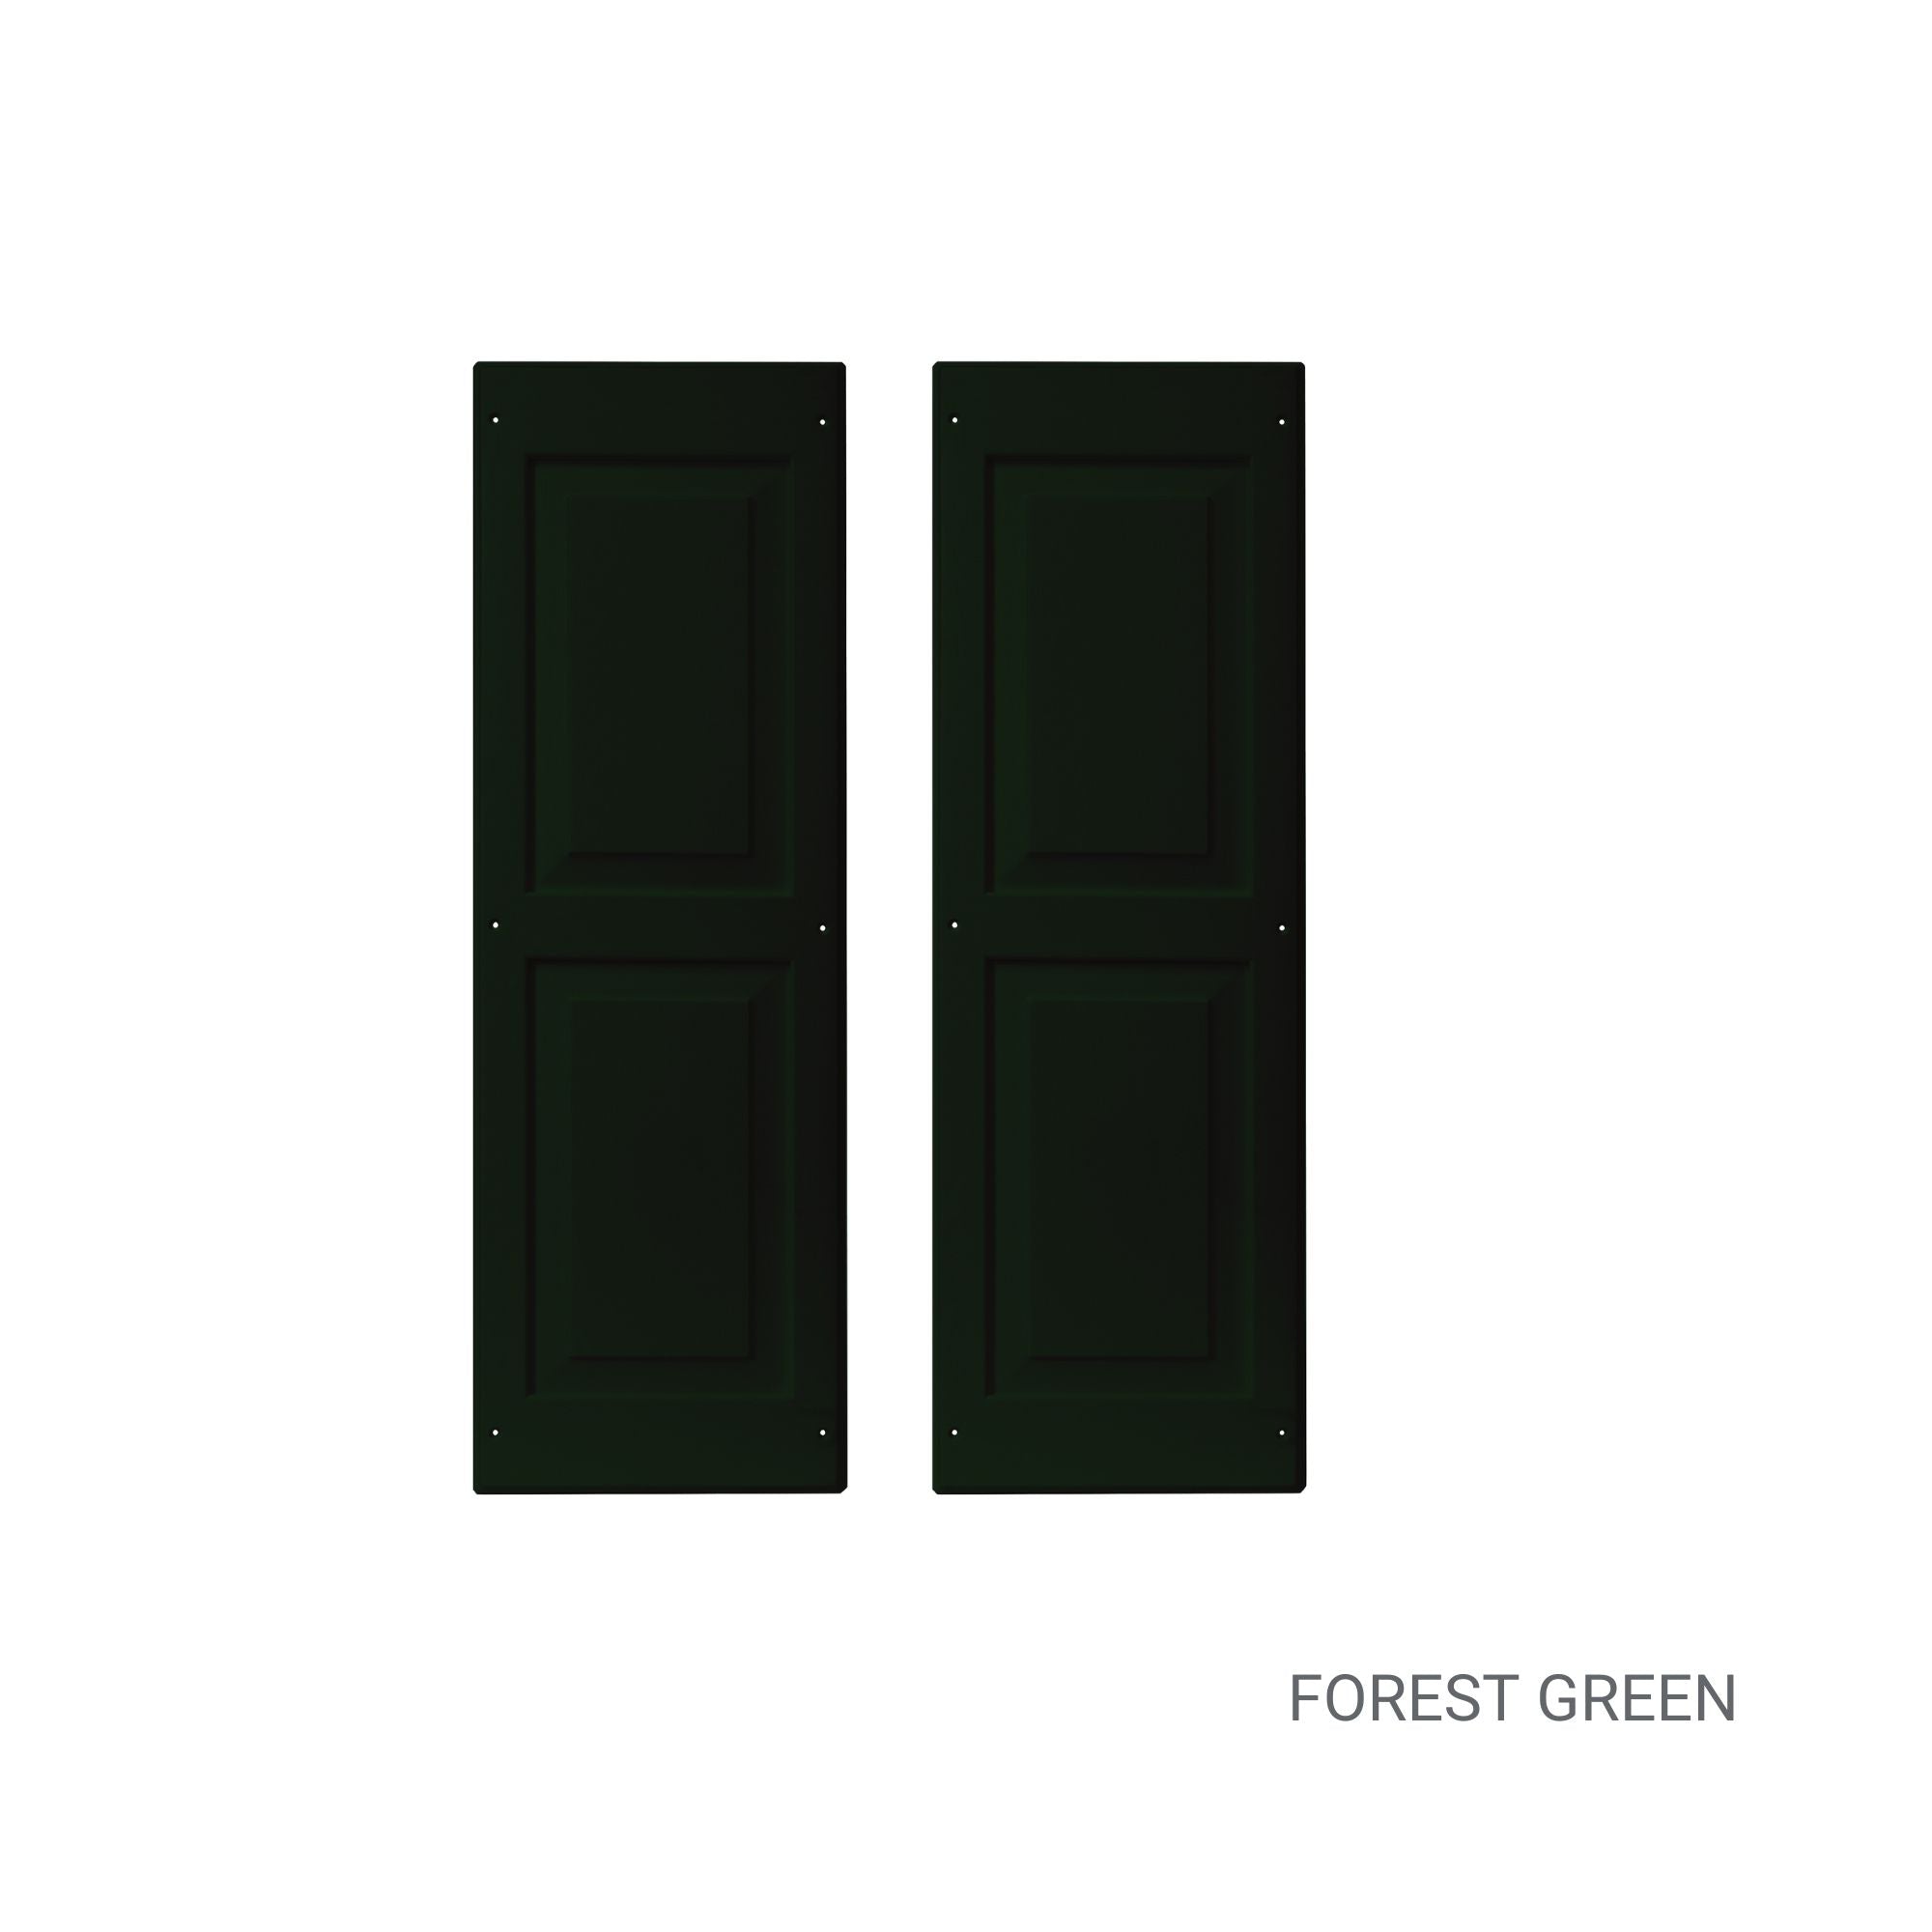 Pair of 12" W x 36" H Raised Panel Forest Green Shutters for Sheds, Playhouses, and MORE